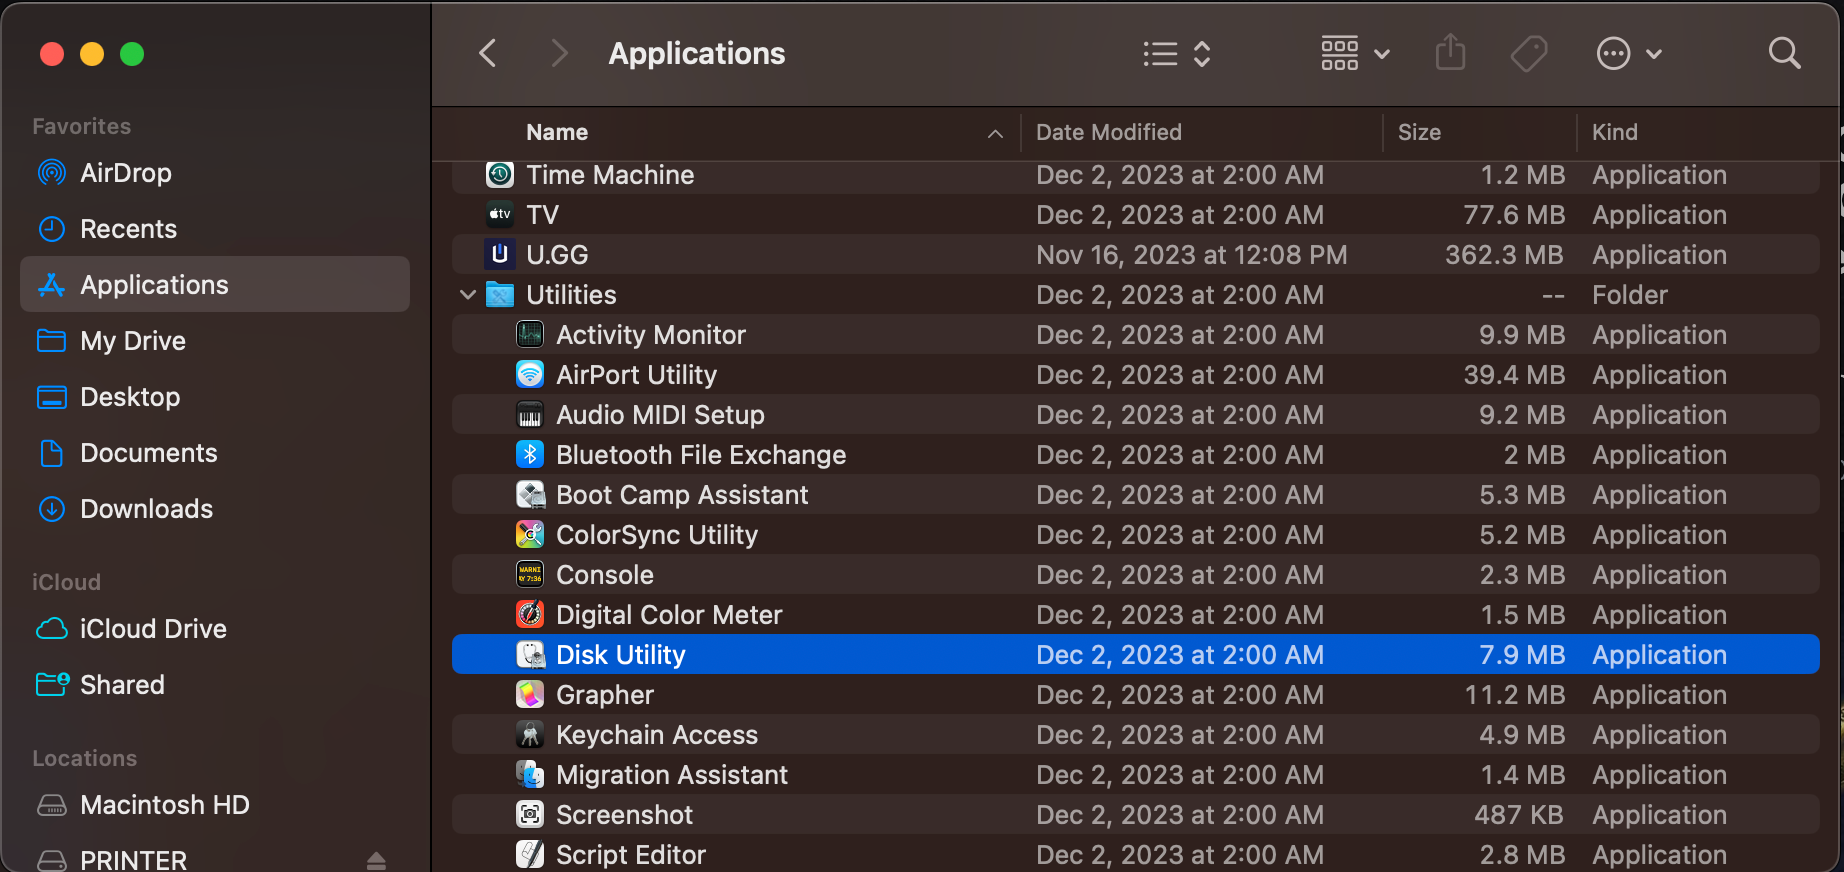 screenshot showing Disk Utility in the list of applications